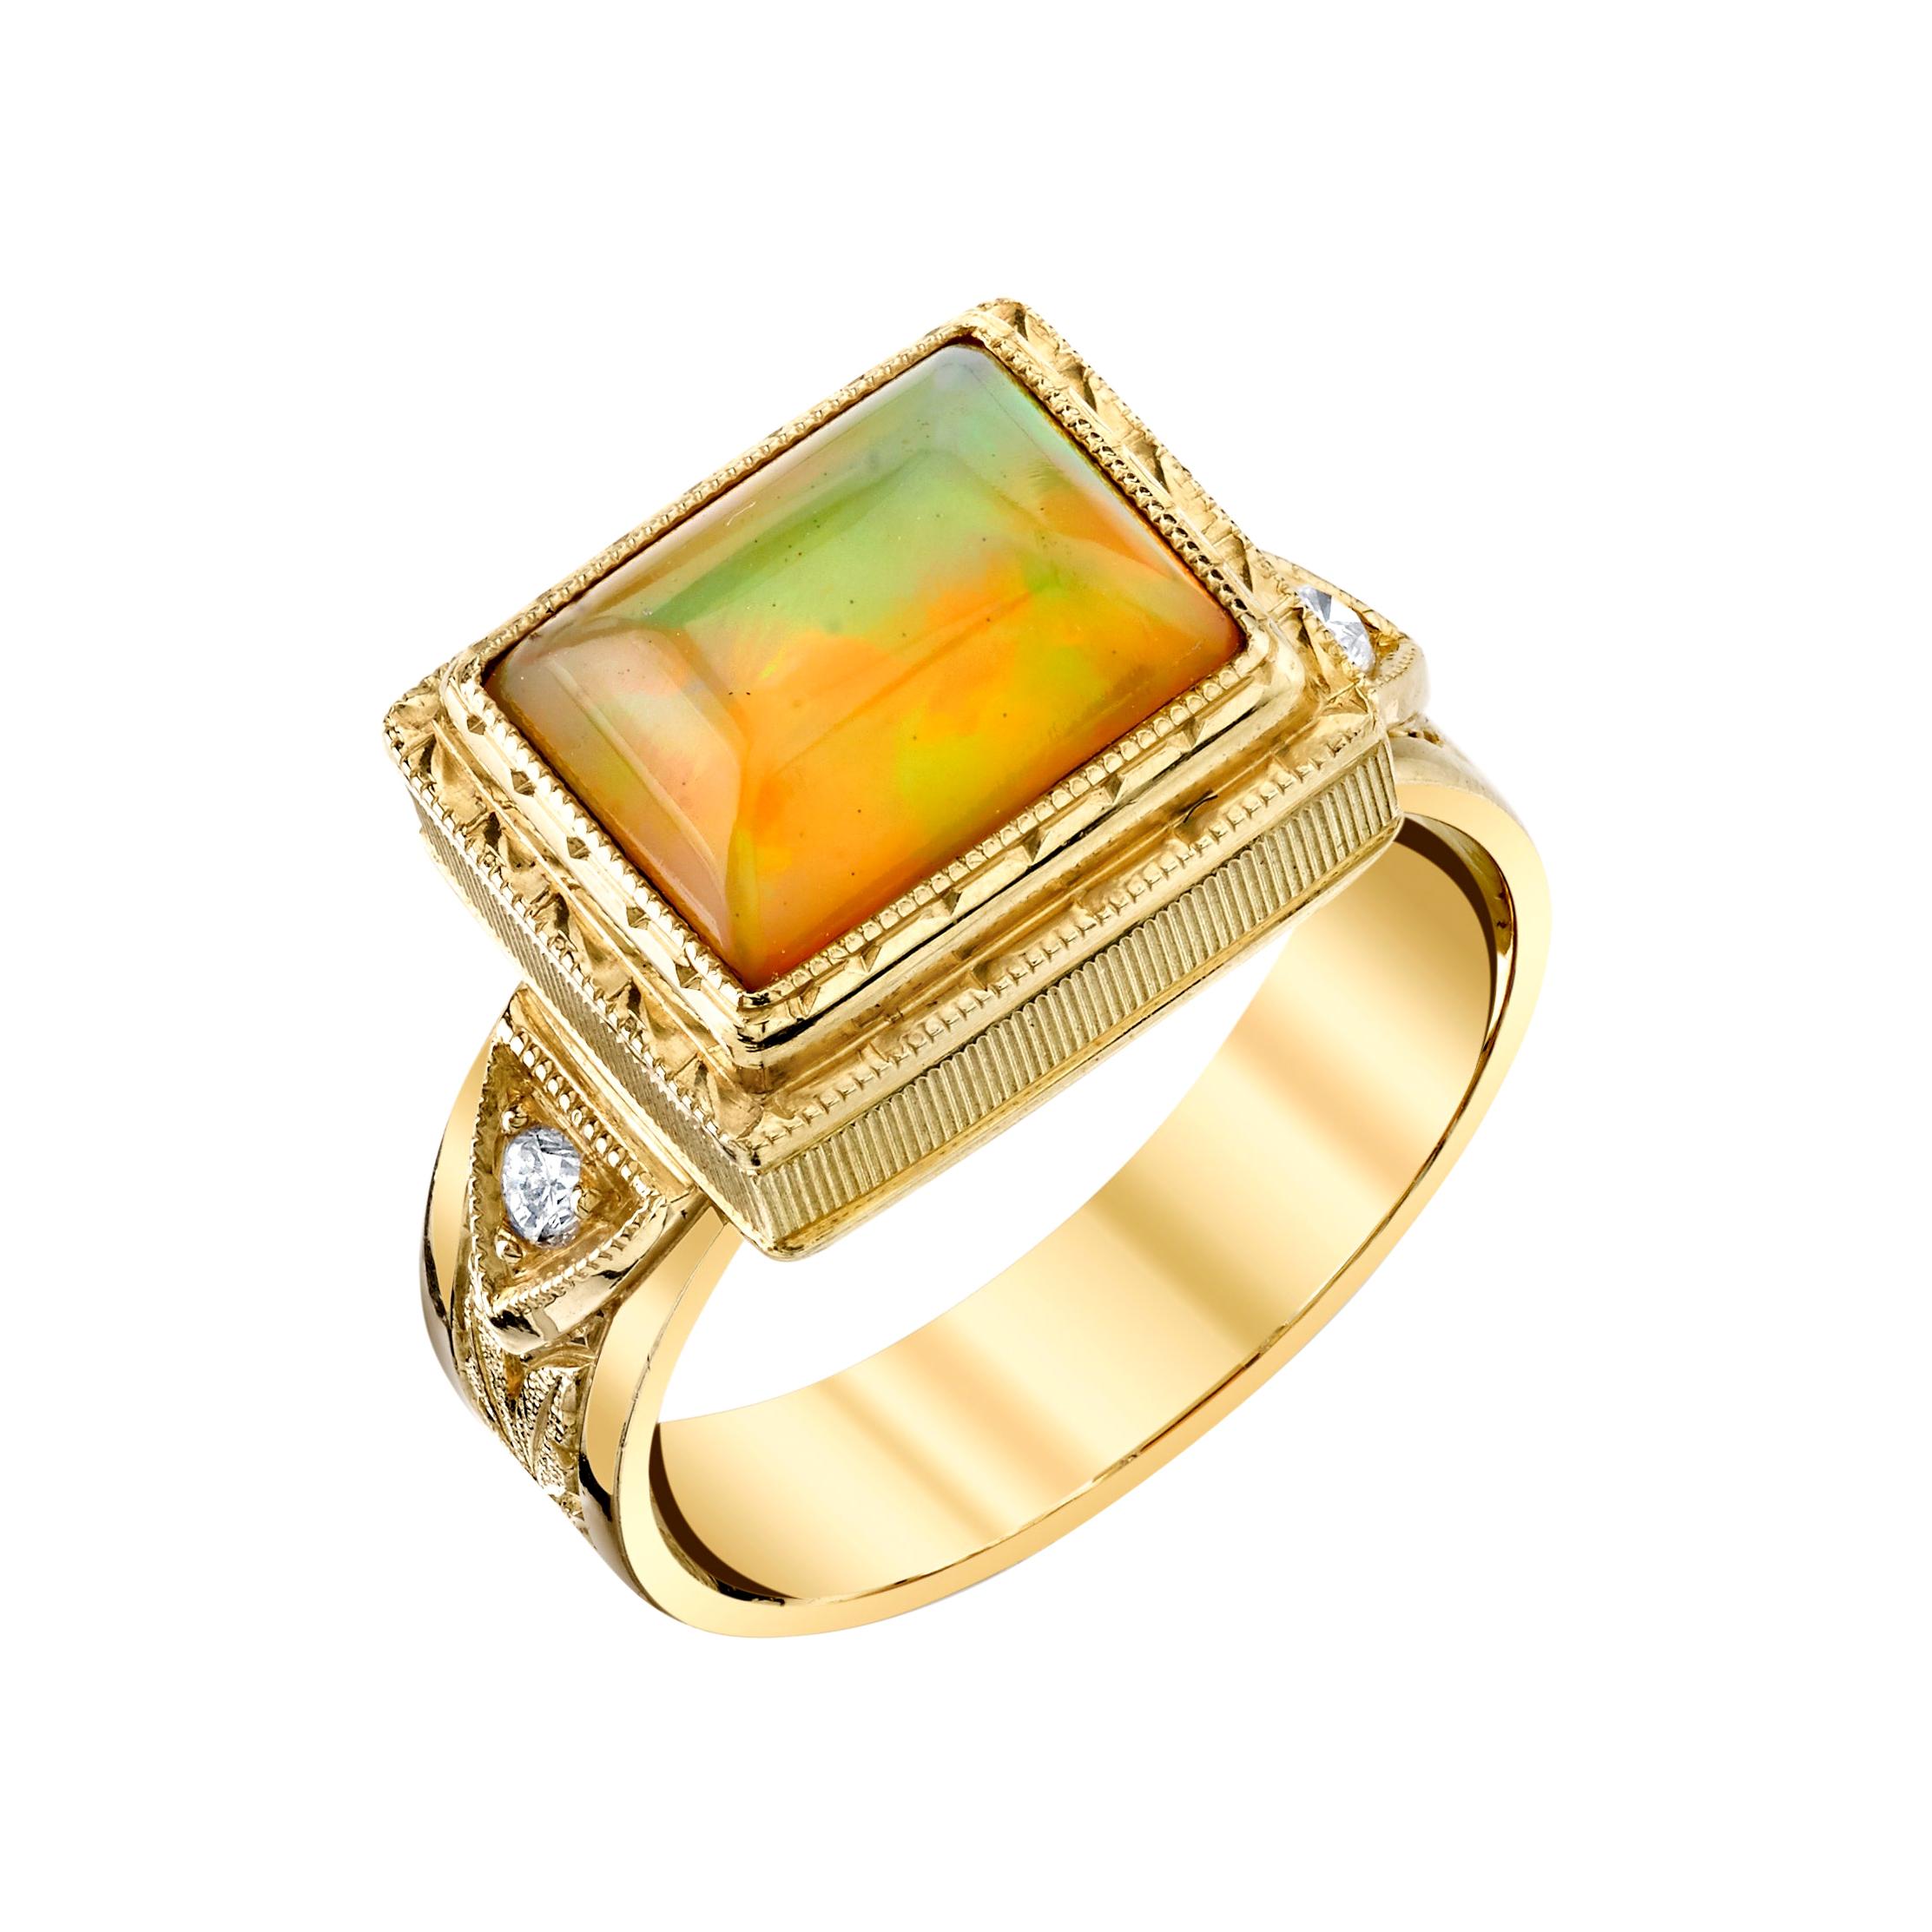  2.14 Carat Opal Cushion and Diamond Hand-Engraved Band Ring in 18k Yellow Gold 